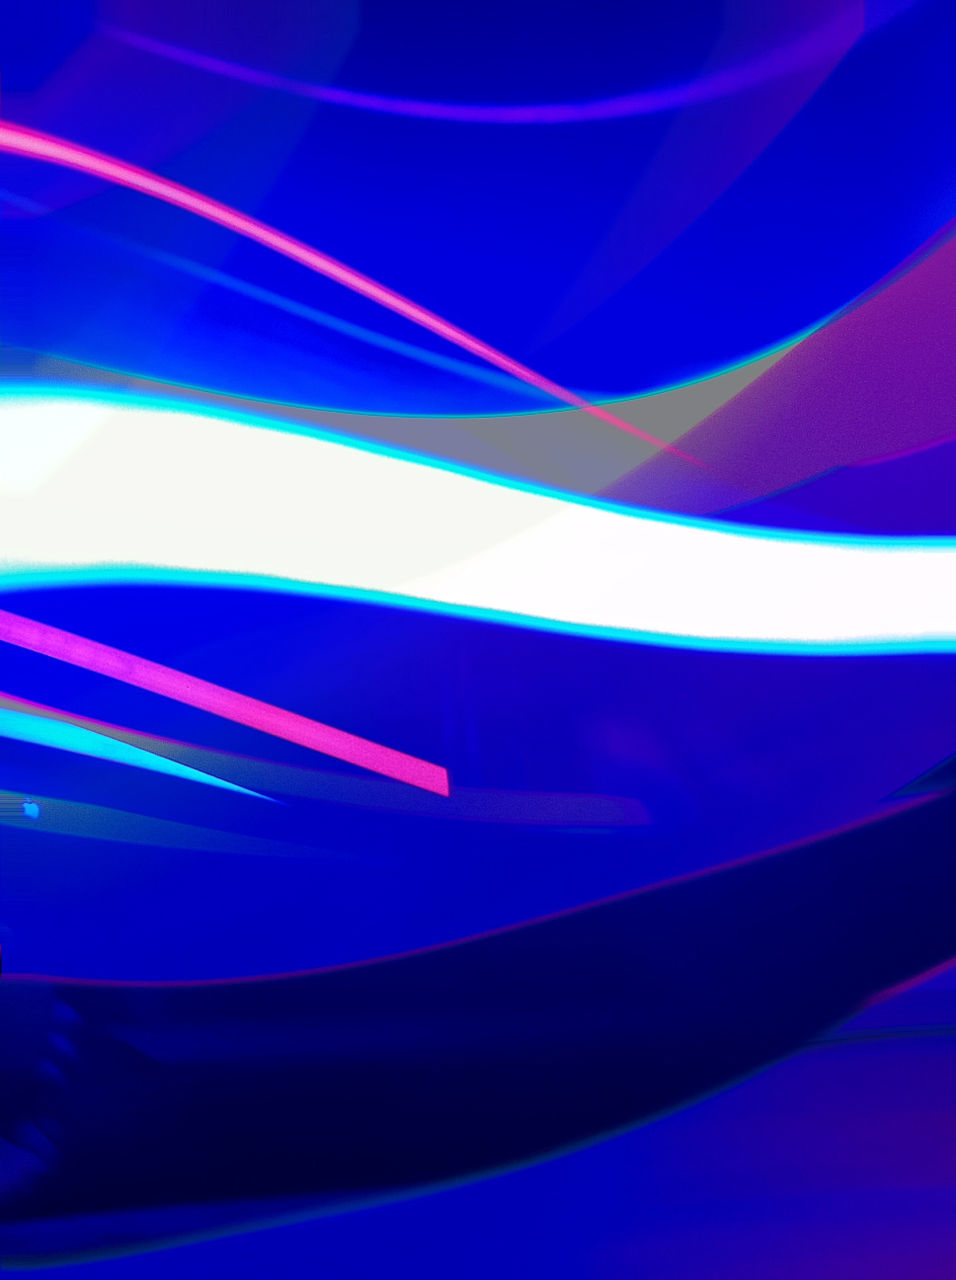 CLOSE-UP OF MULTI COLORED LIGHT PAINTING